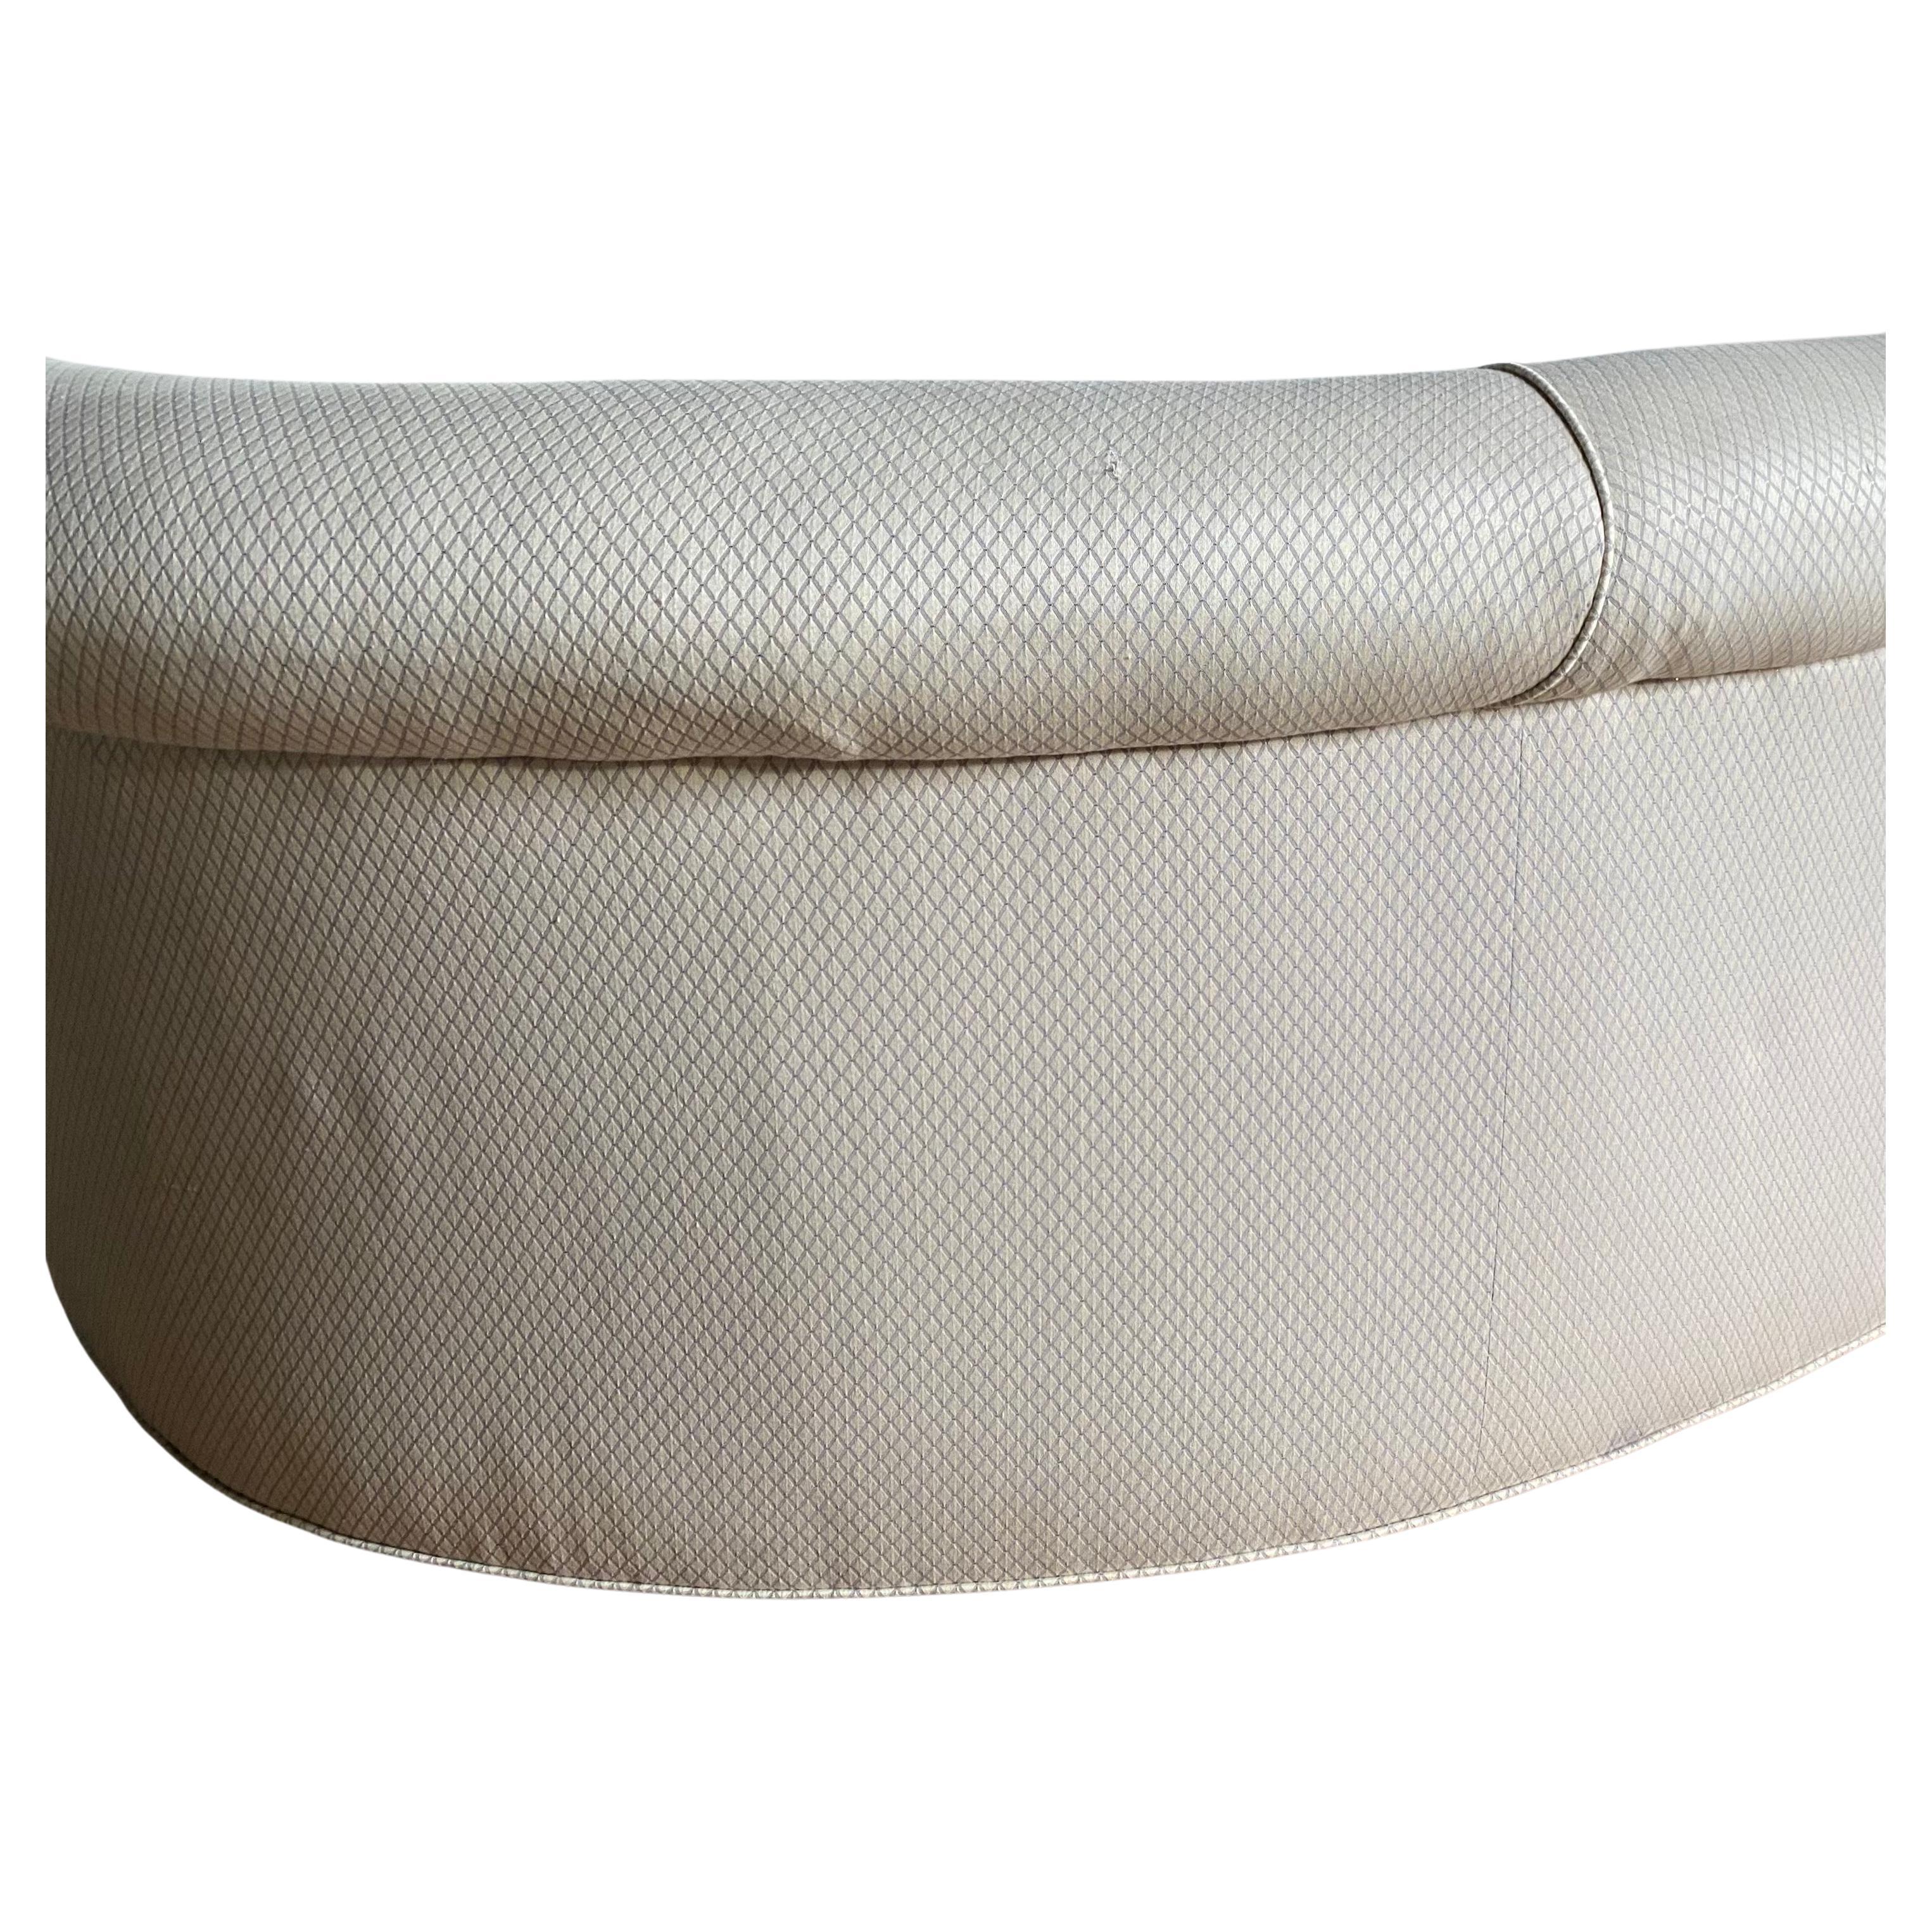 Mid-Century Modern Kidney Shaped Curved Serpentine Biomorphic Cloud Sofa For Sale 5